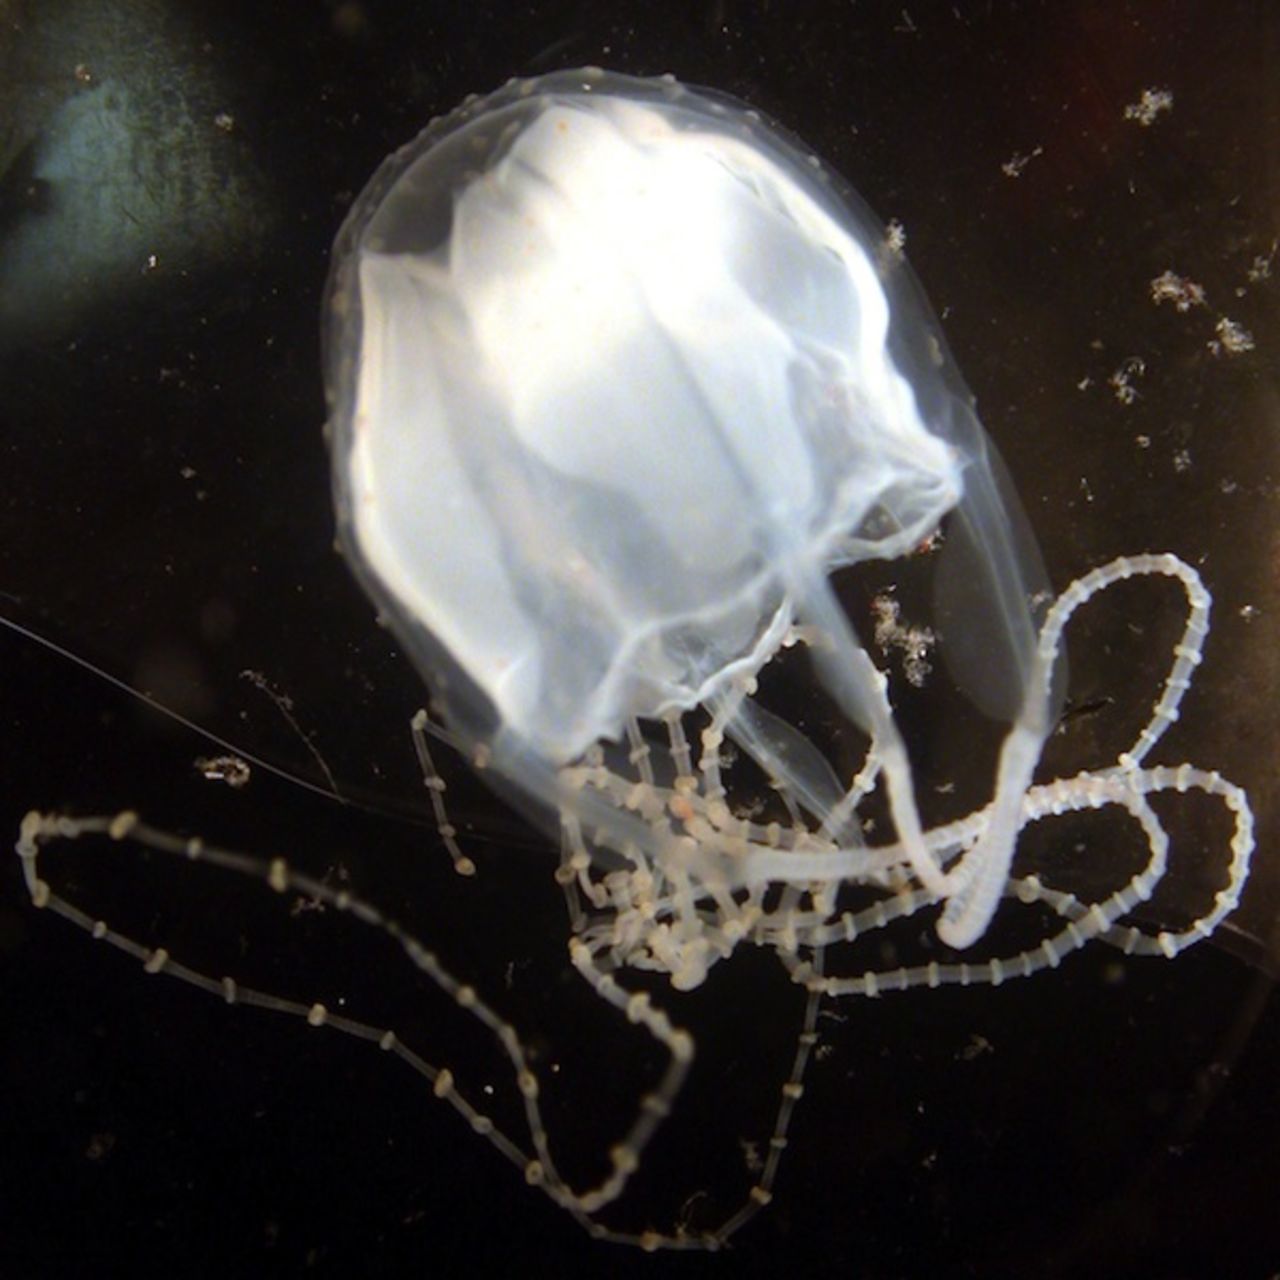 Despite being smaller than a pinky nail, the irukandji jellyfish is one of the world's most toxic animals.